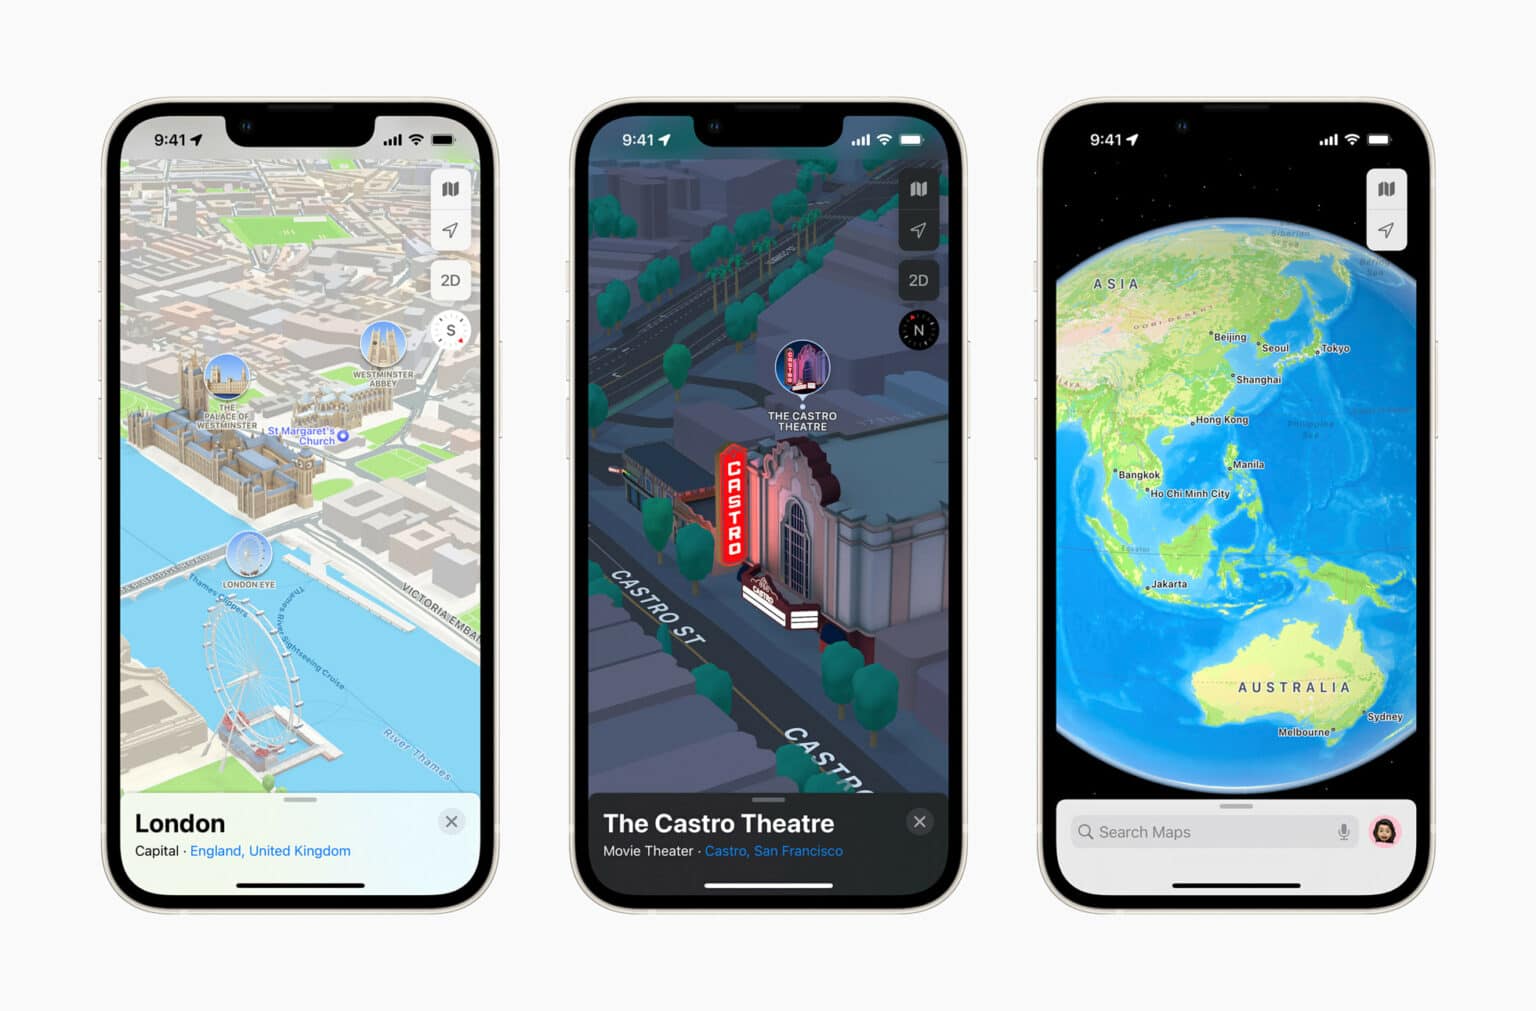 The iOS 15 updates to Apple Maps include 3D imagery and much more.